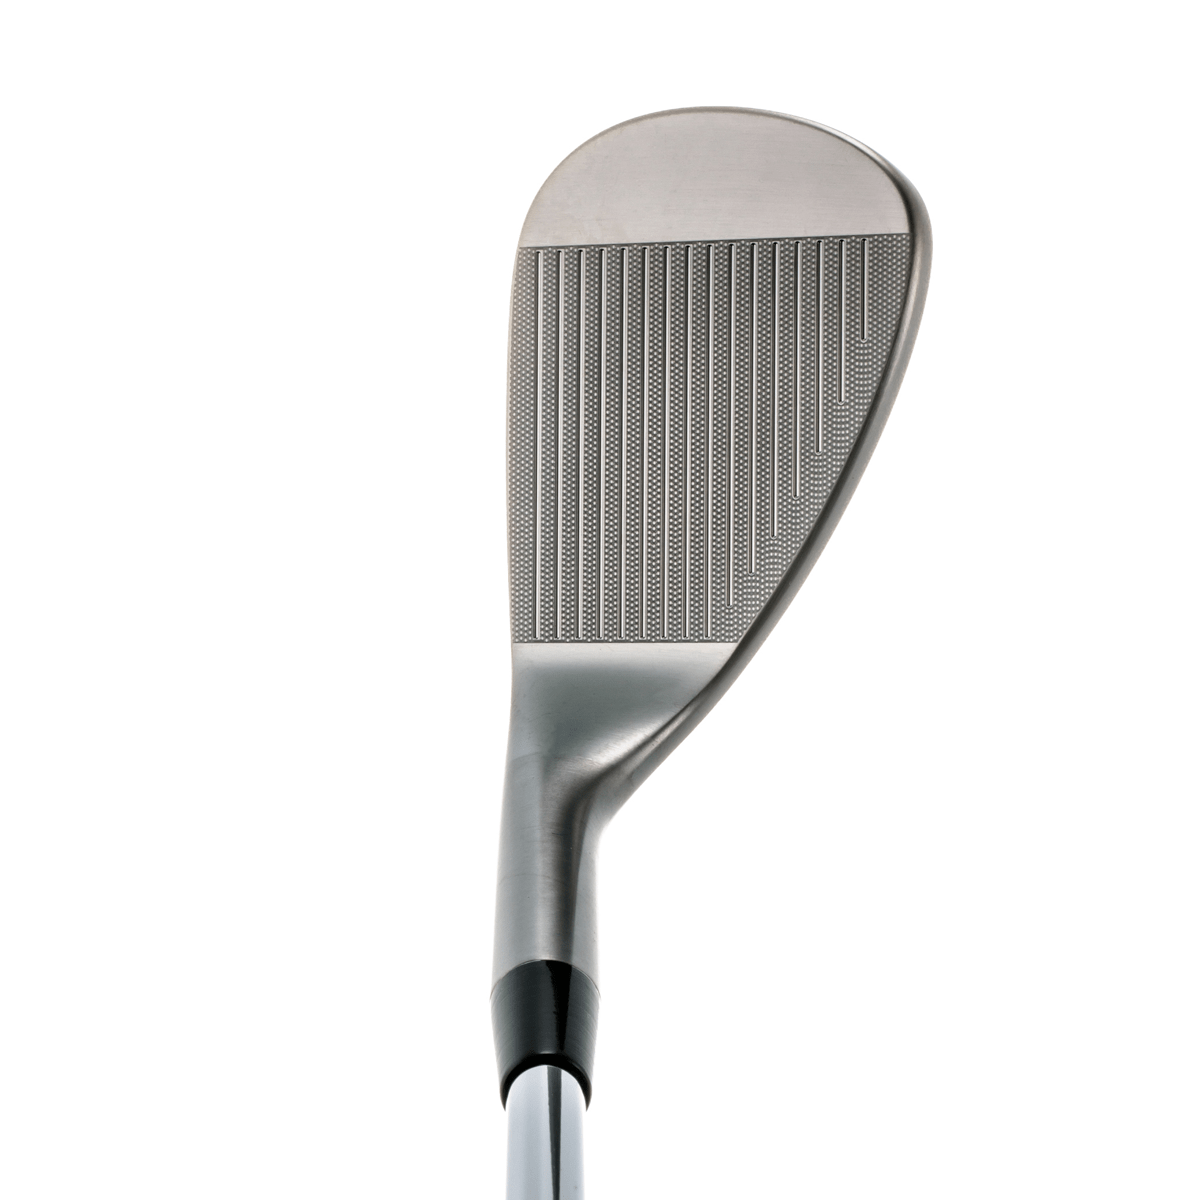 PROTOCONCEPT Golf, Forged Wedge - 35